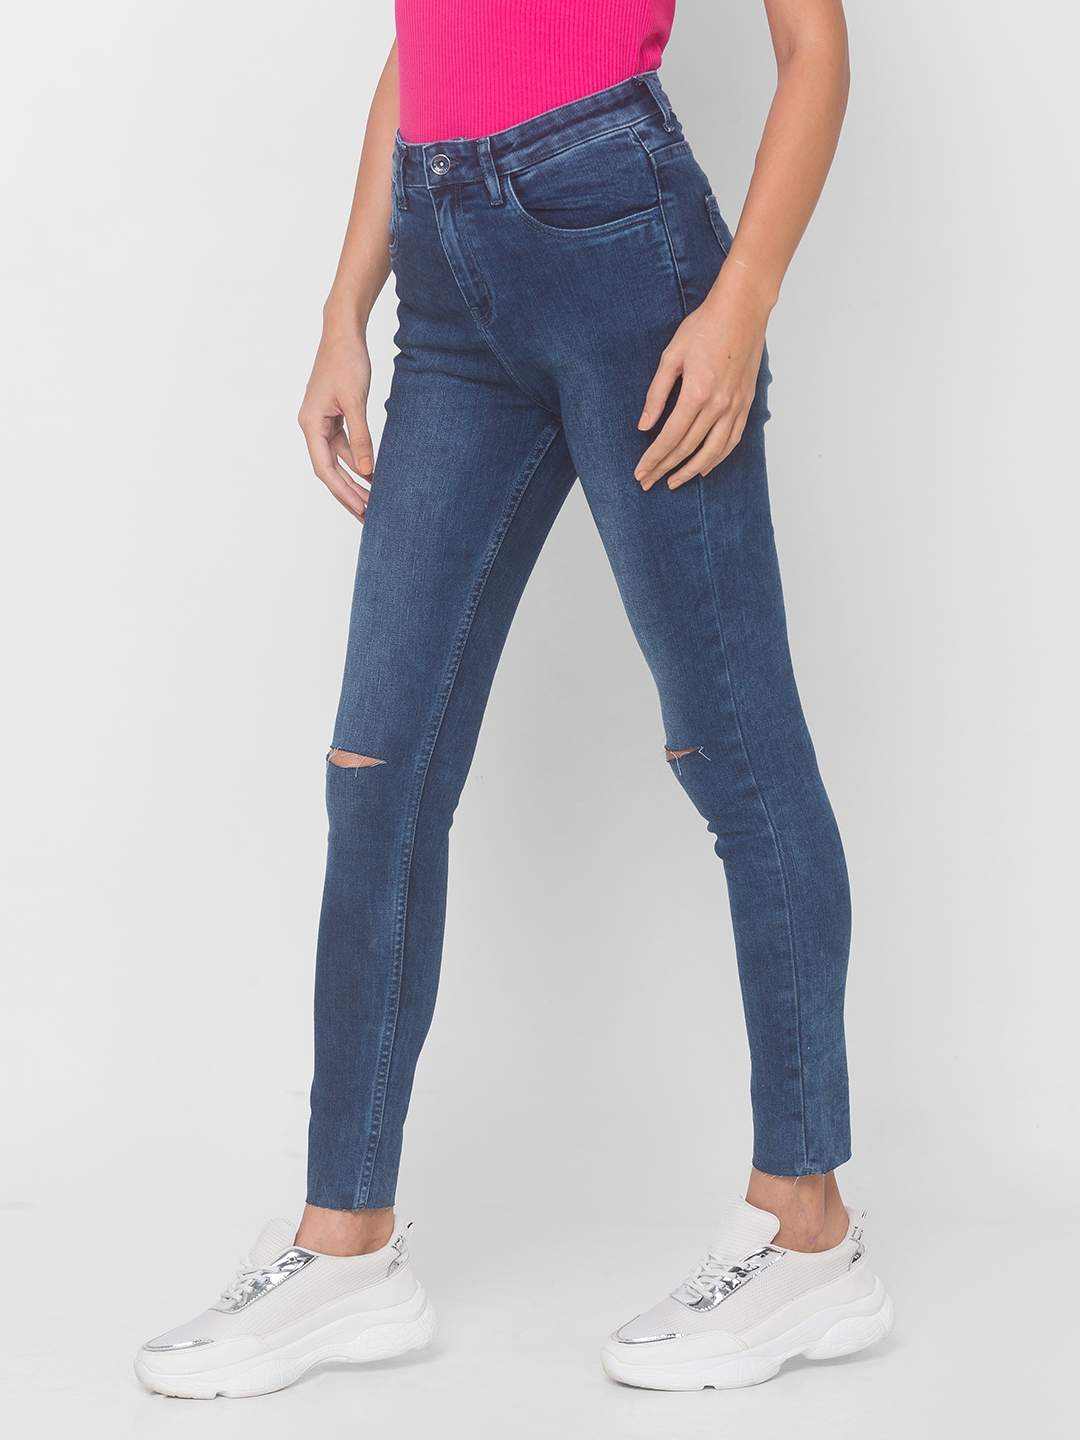 globus | Women's Blue Cotton Solid Ripped Jeans 3